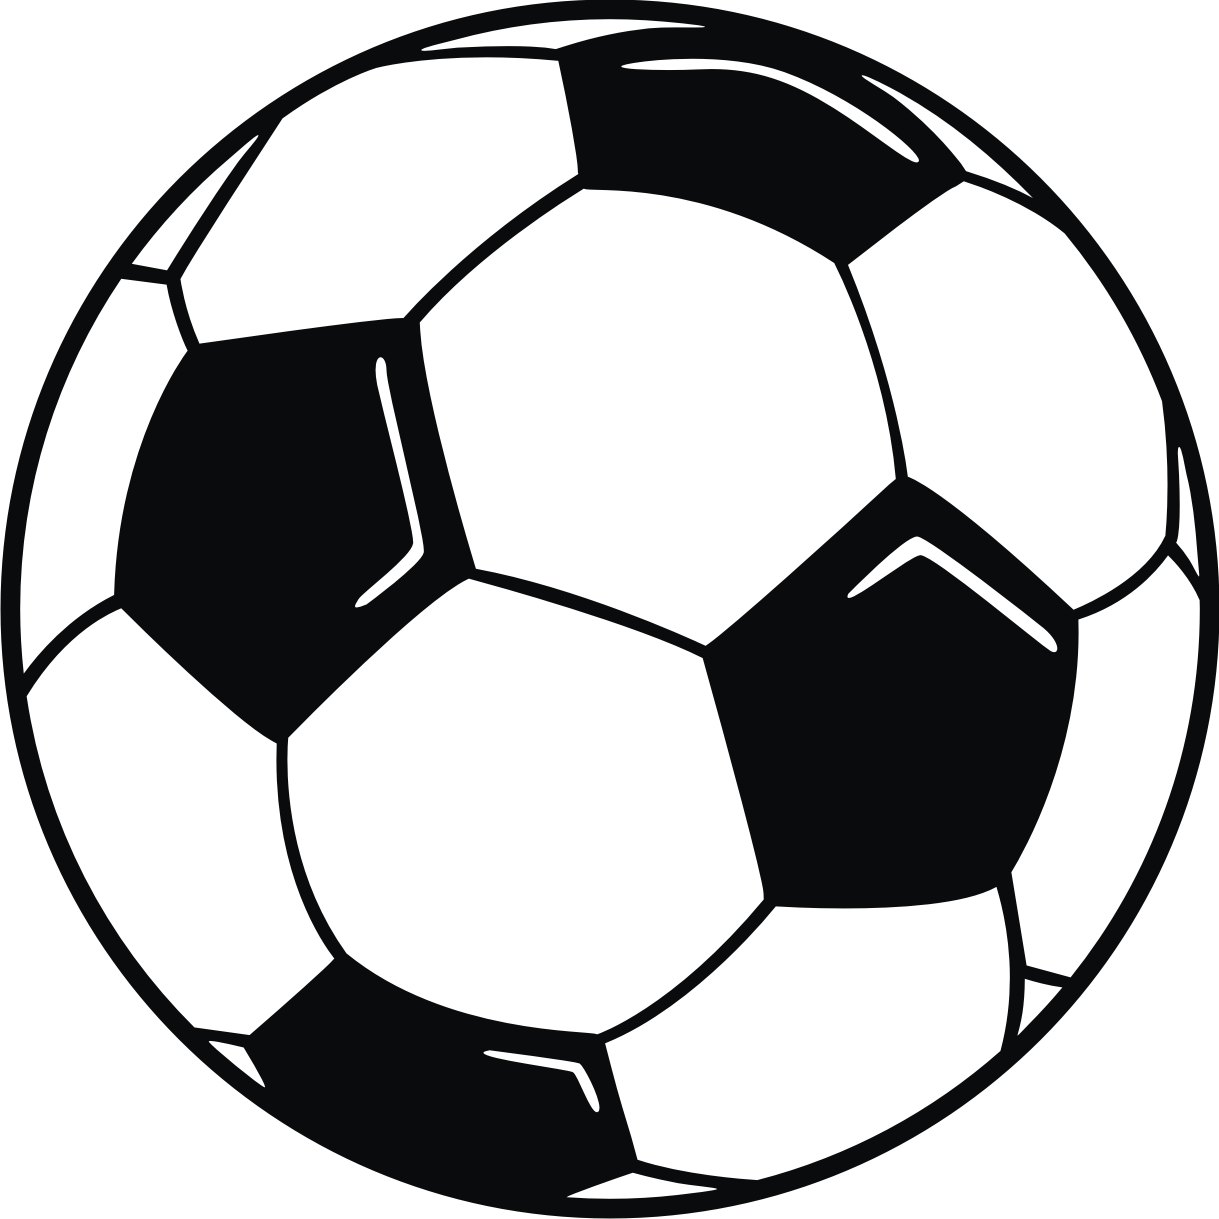 Soccerball Image - ClipArt Best